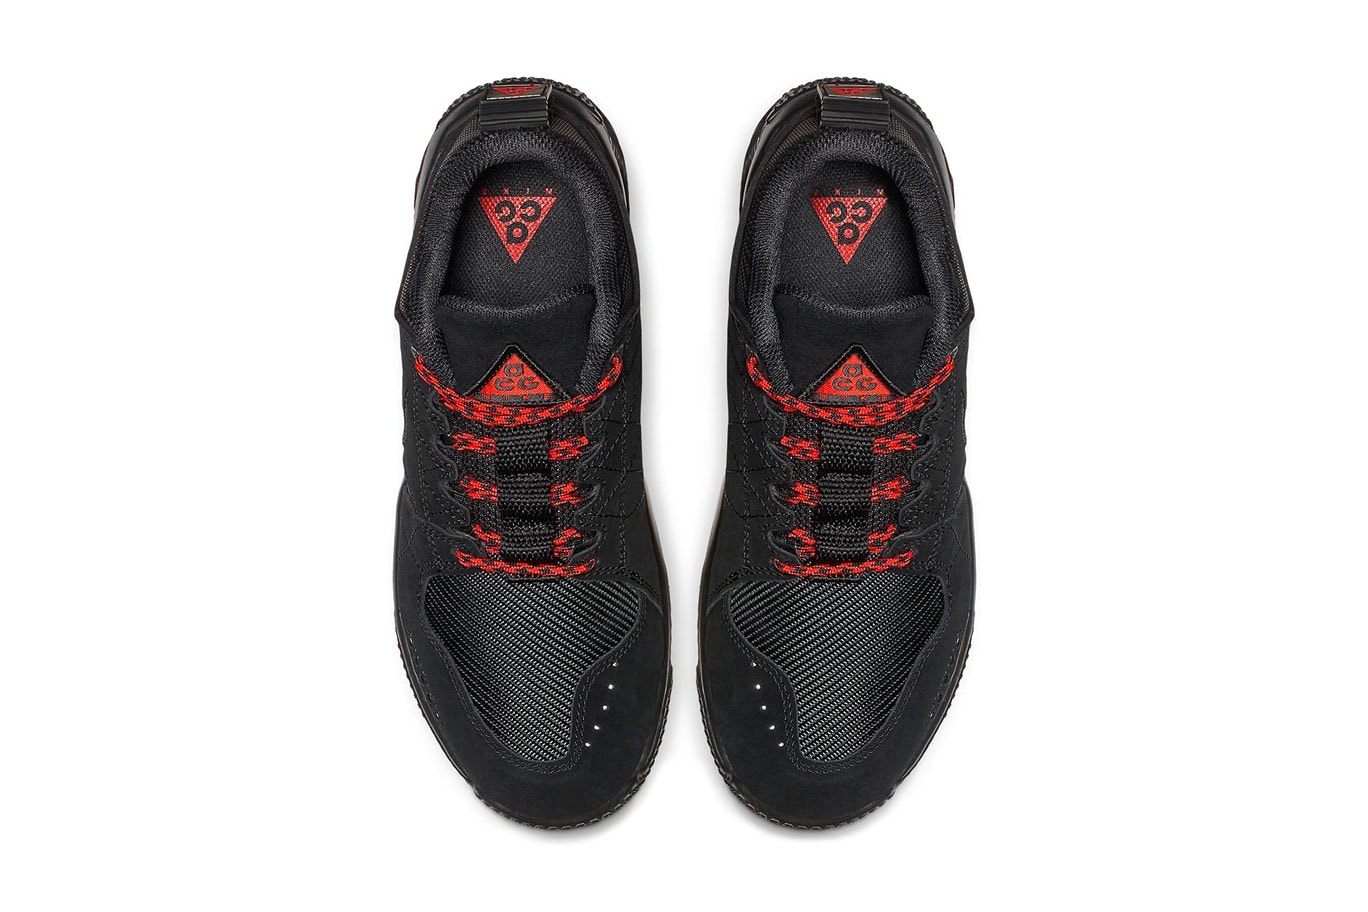 Nike ACG Dog Mountain “Triple Black” Release red laces date price 2018 info sneaker colorway buy online 